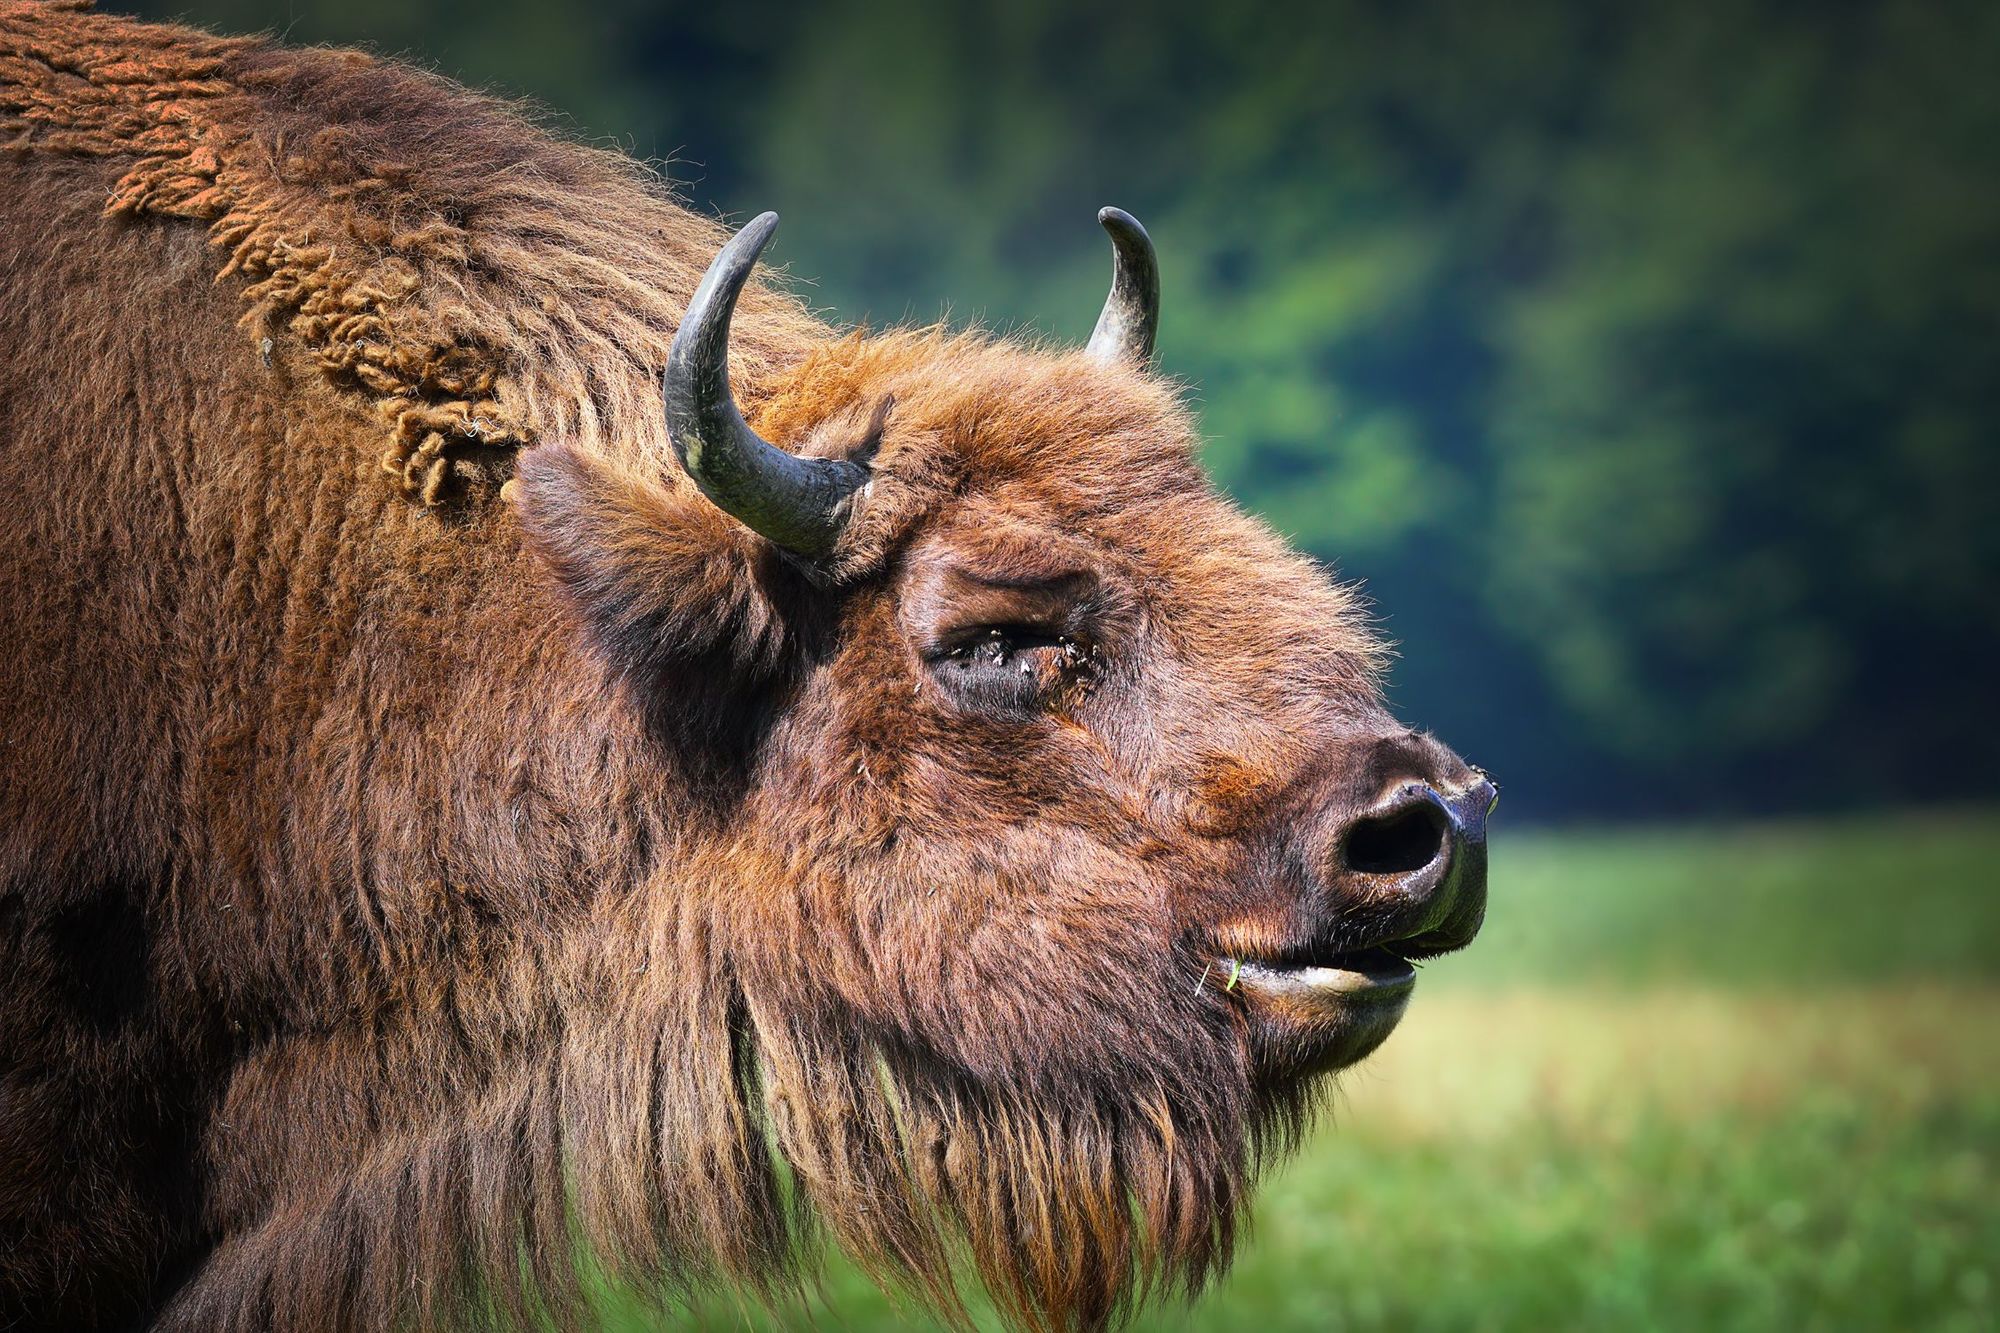 A close-up of a European bison.